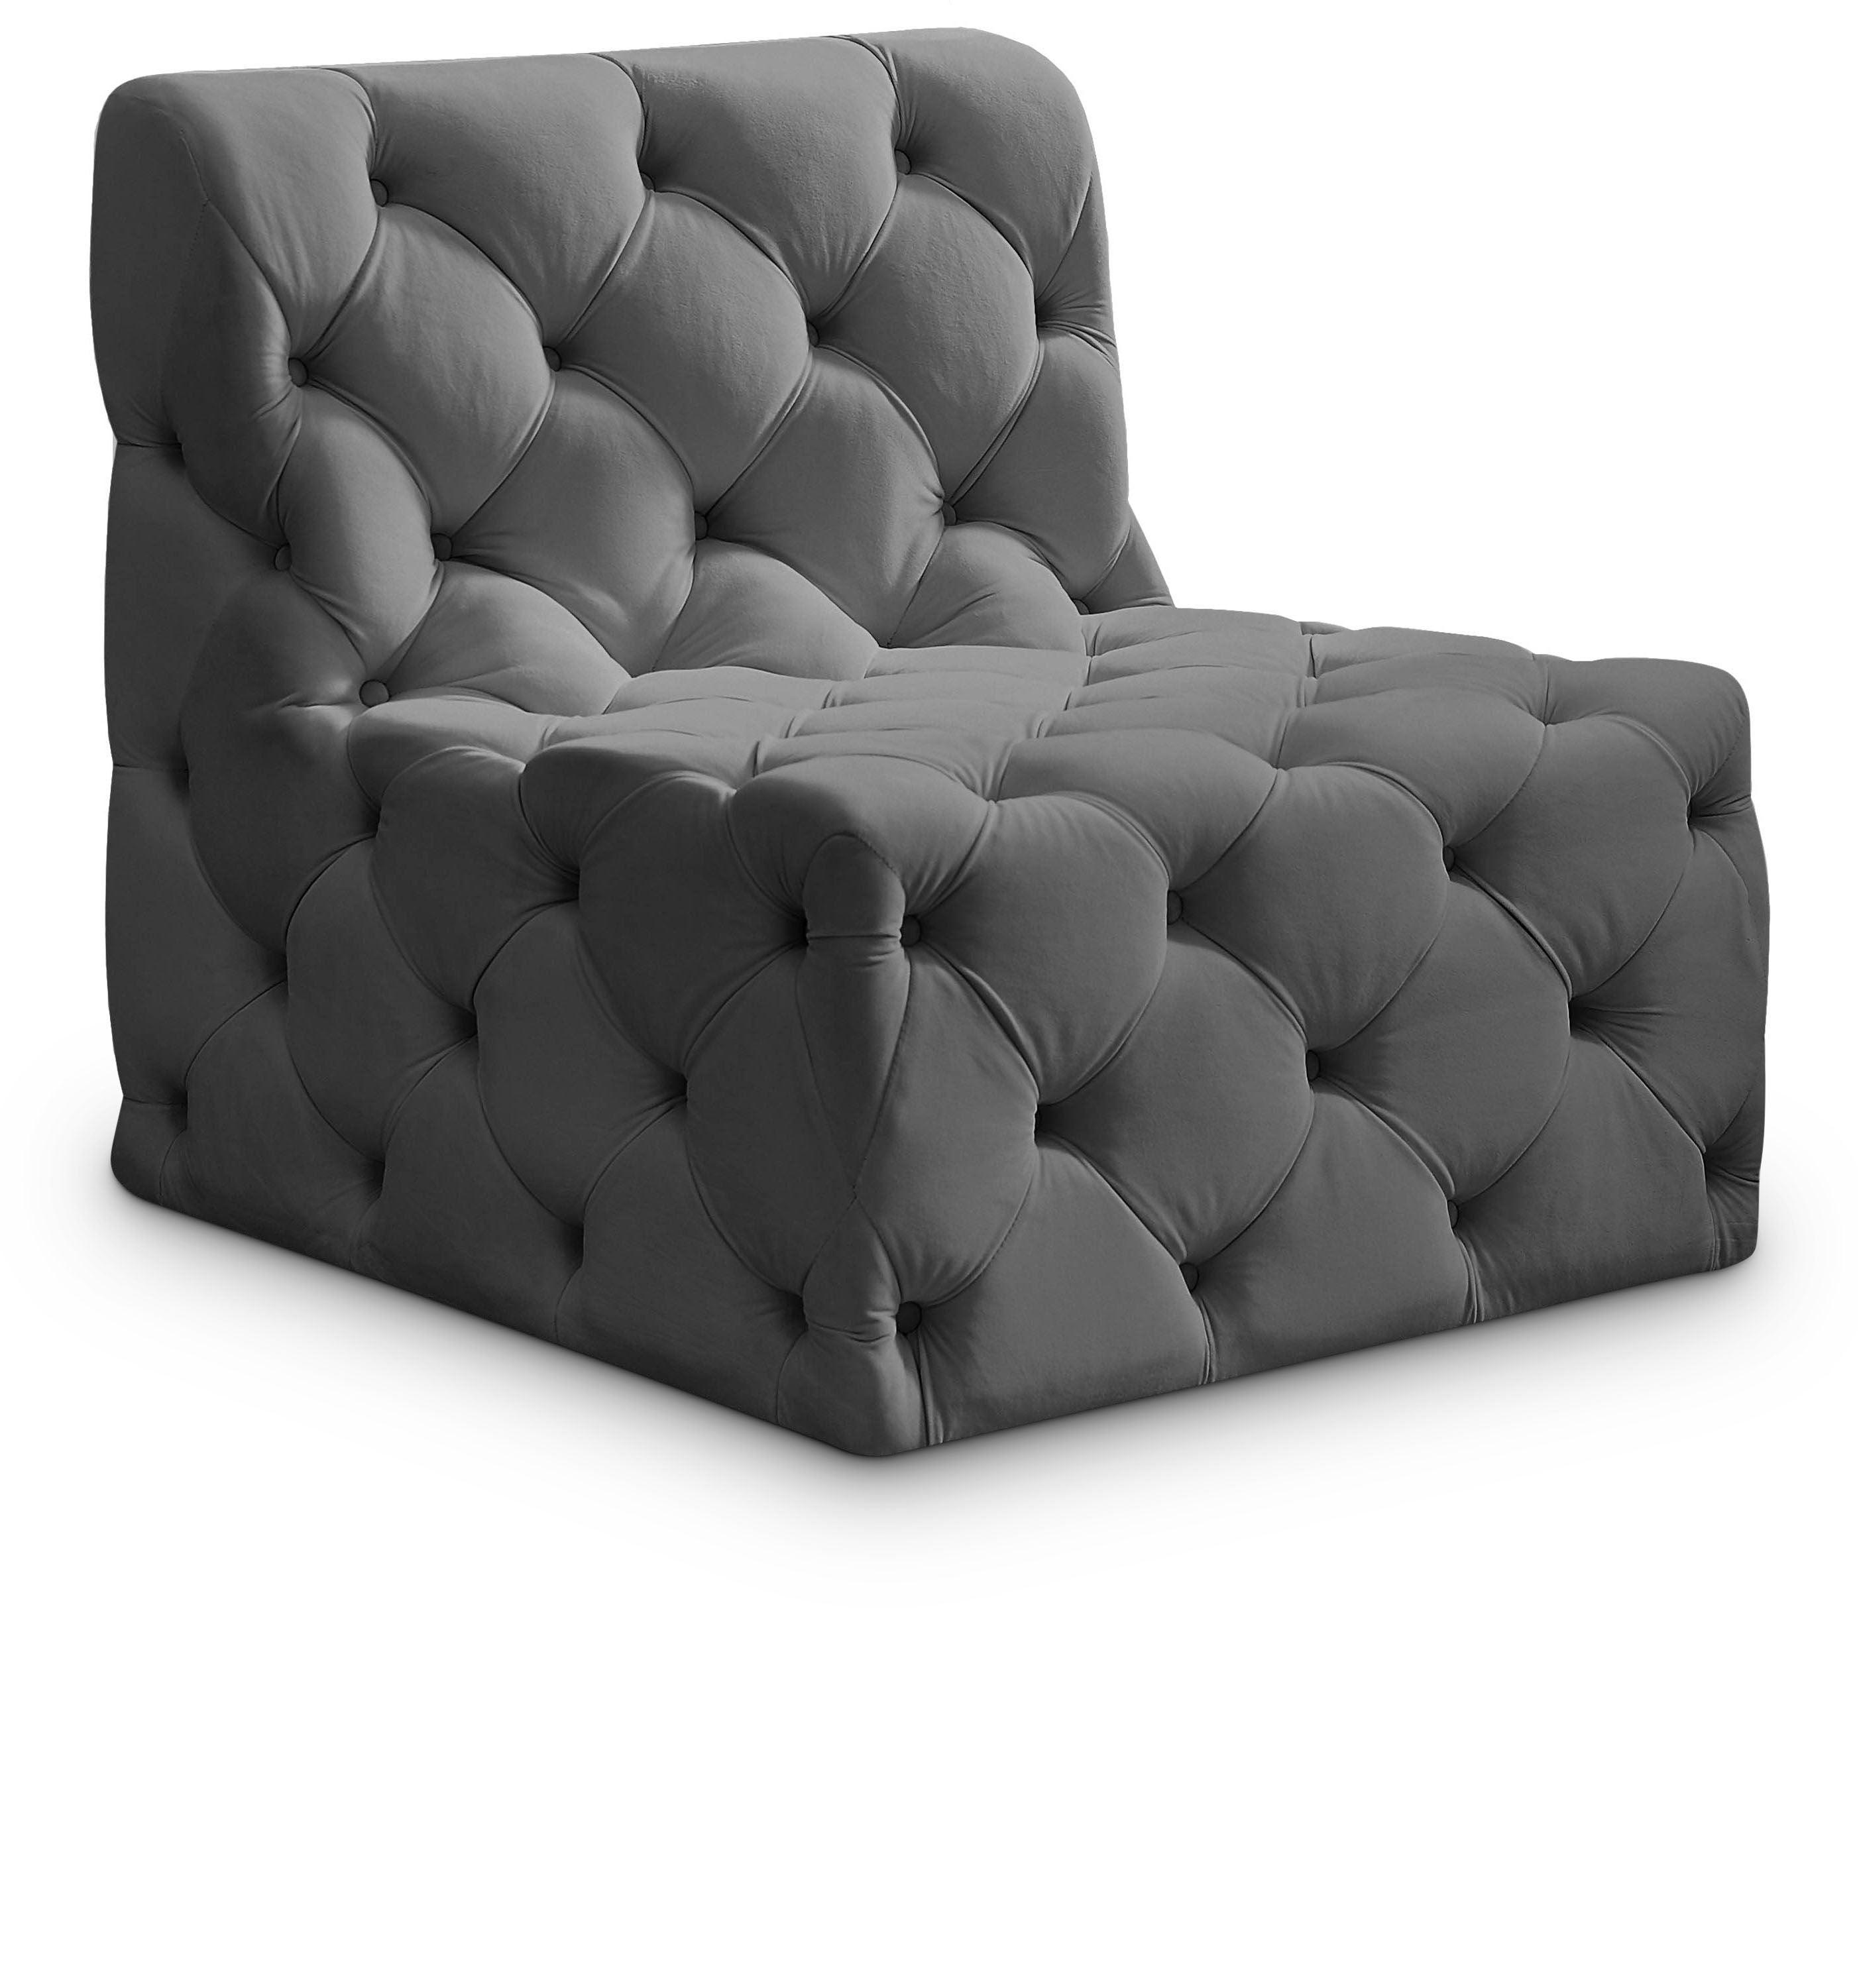 Meridian Furniture - Tuft - Armless Chair - Gray - 5th Avenue Furniture